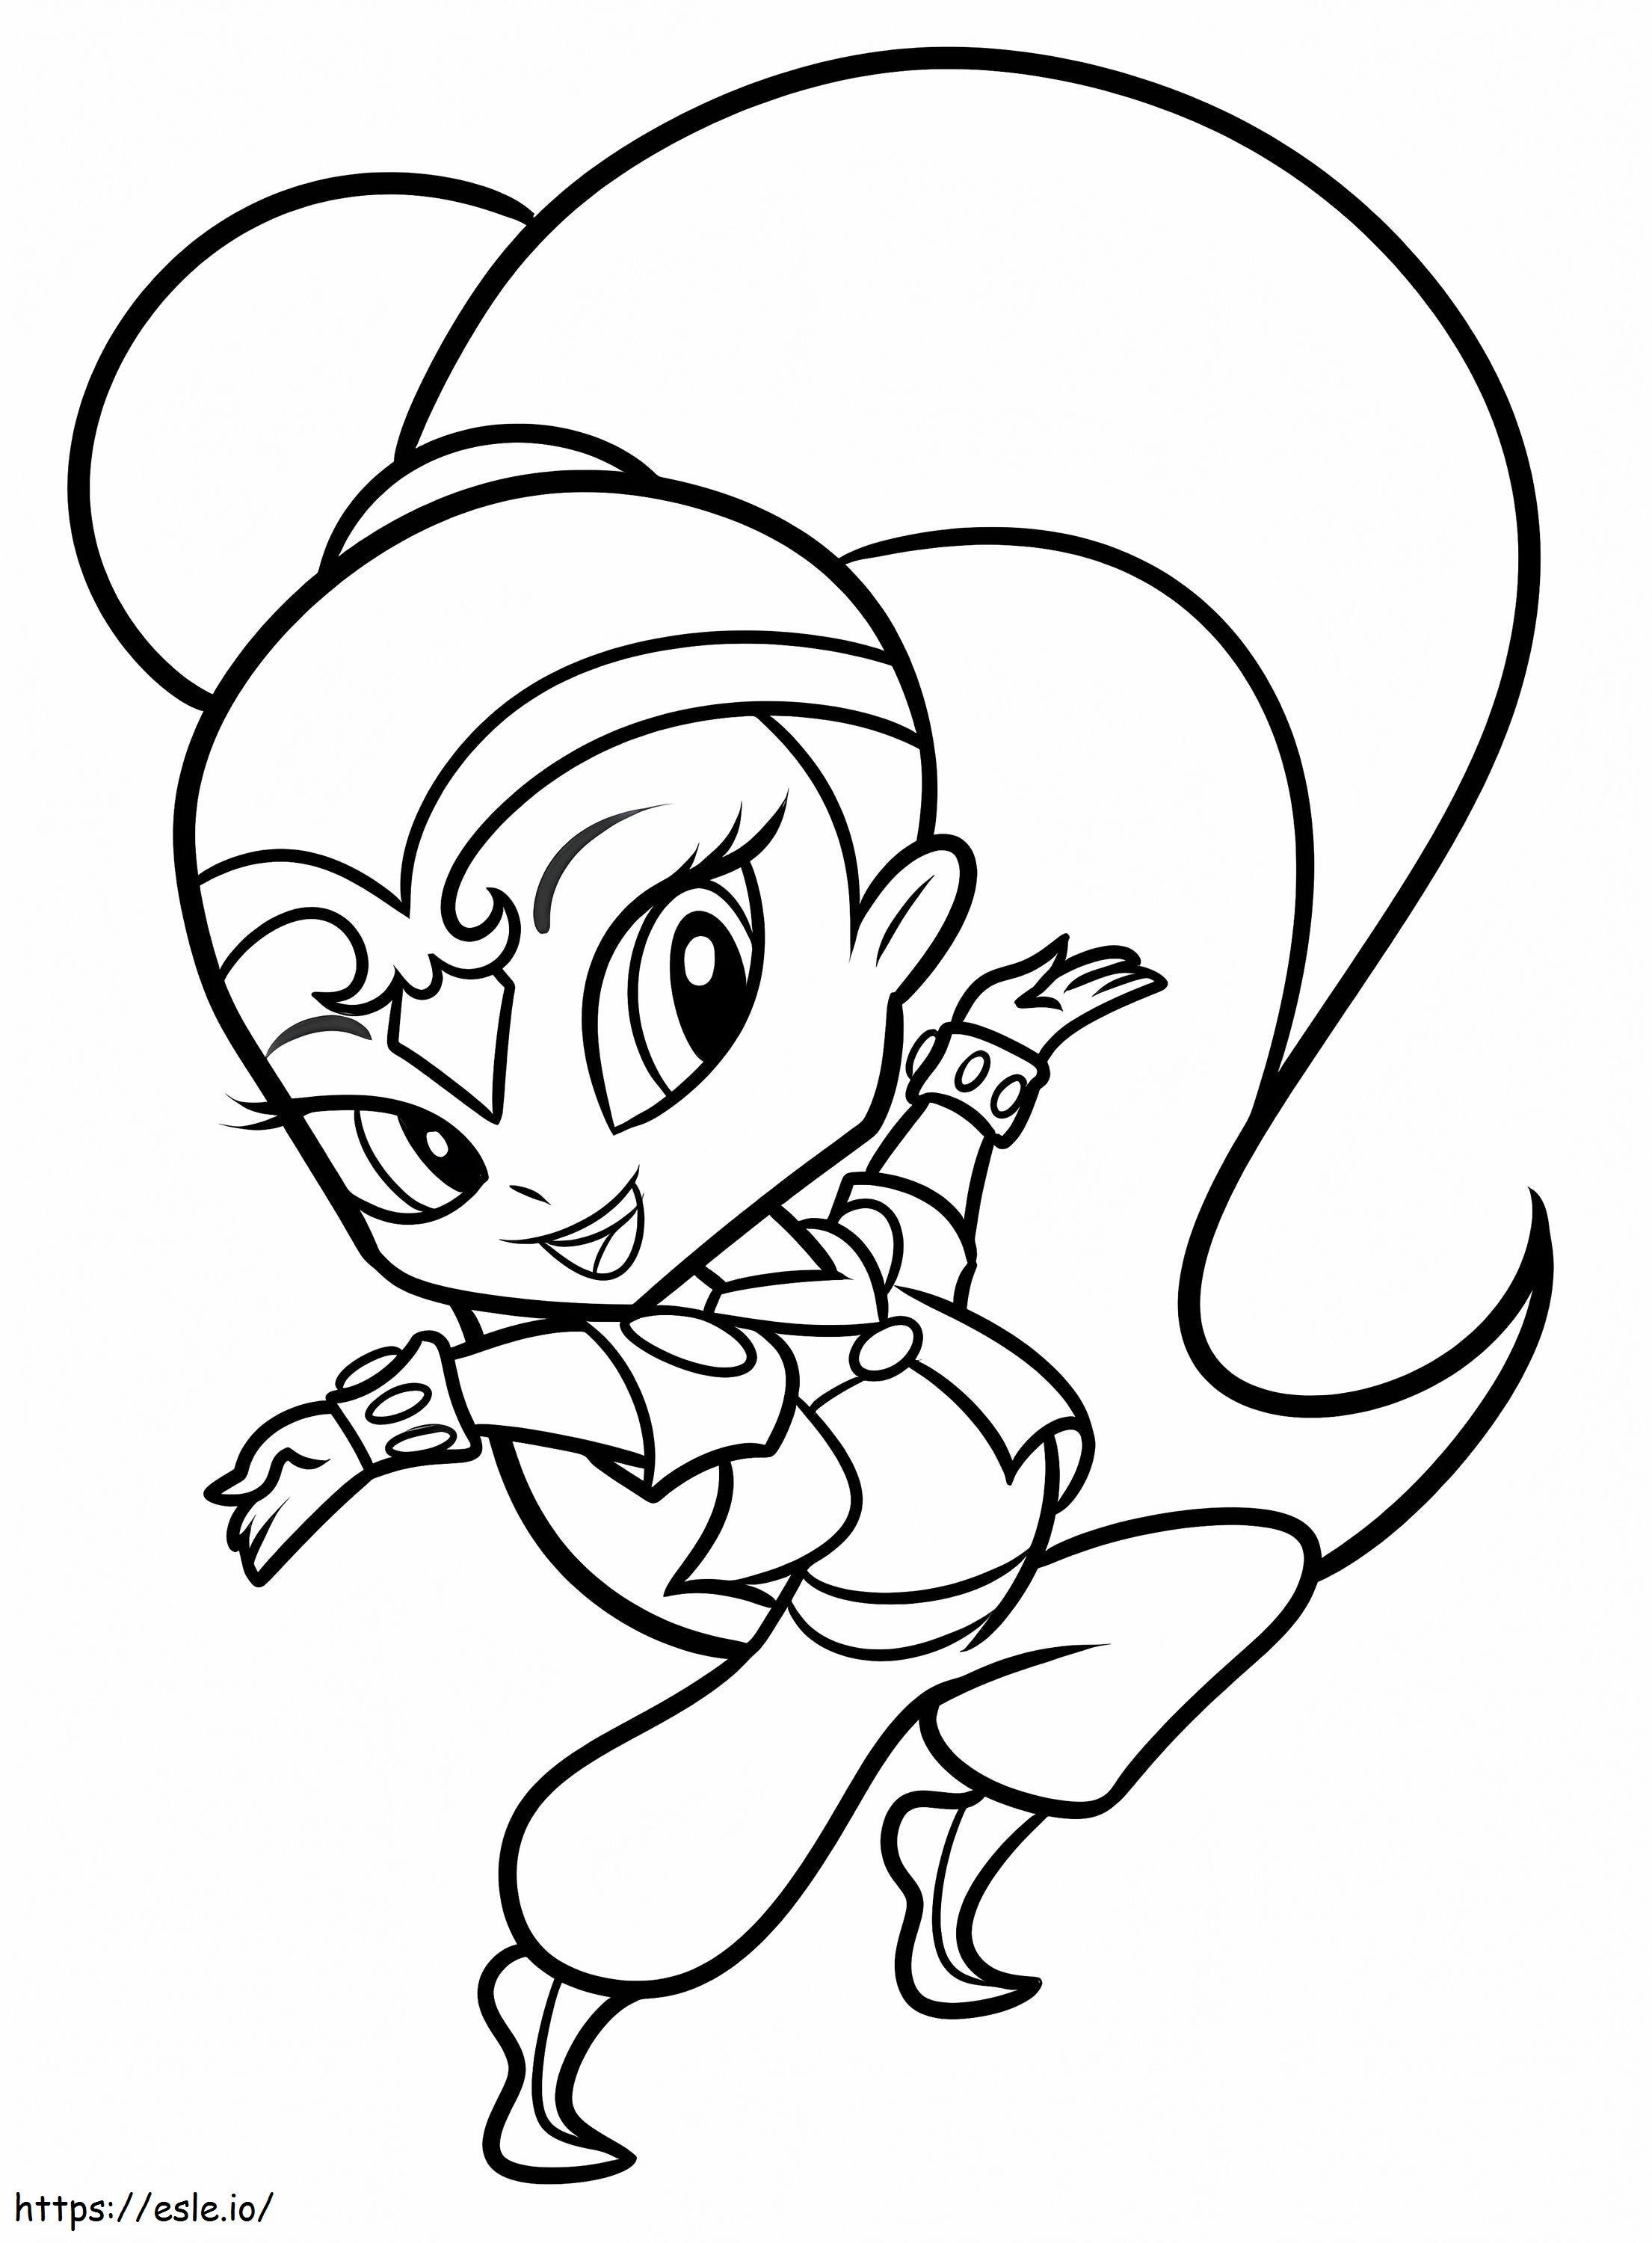 1571445362 Shimmer And Shine 20 Shimmer And Shine Compilation Free coloring page